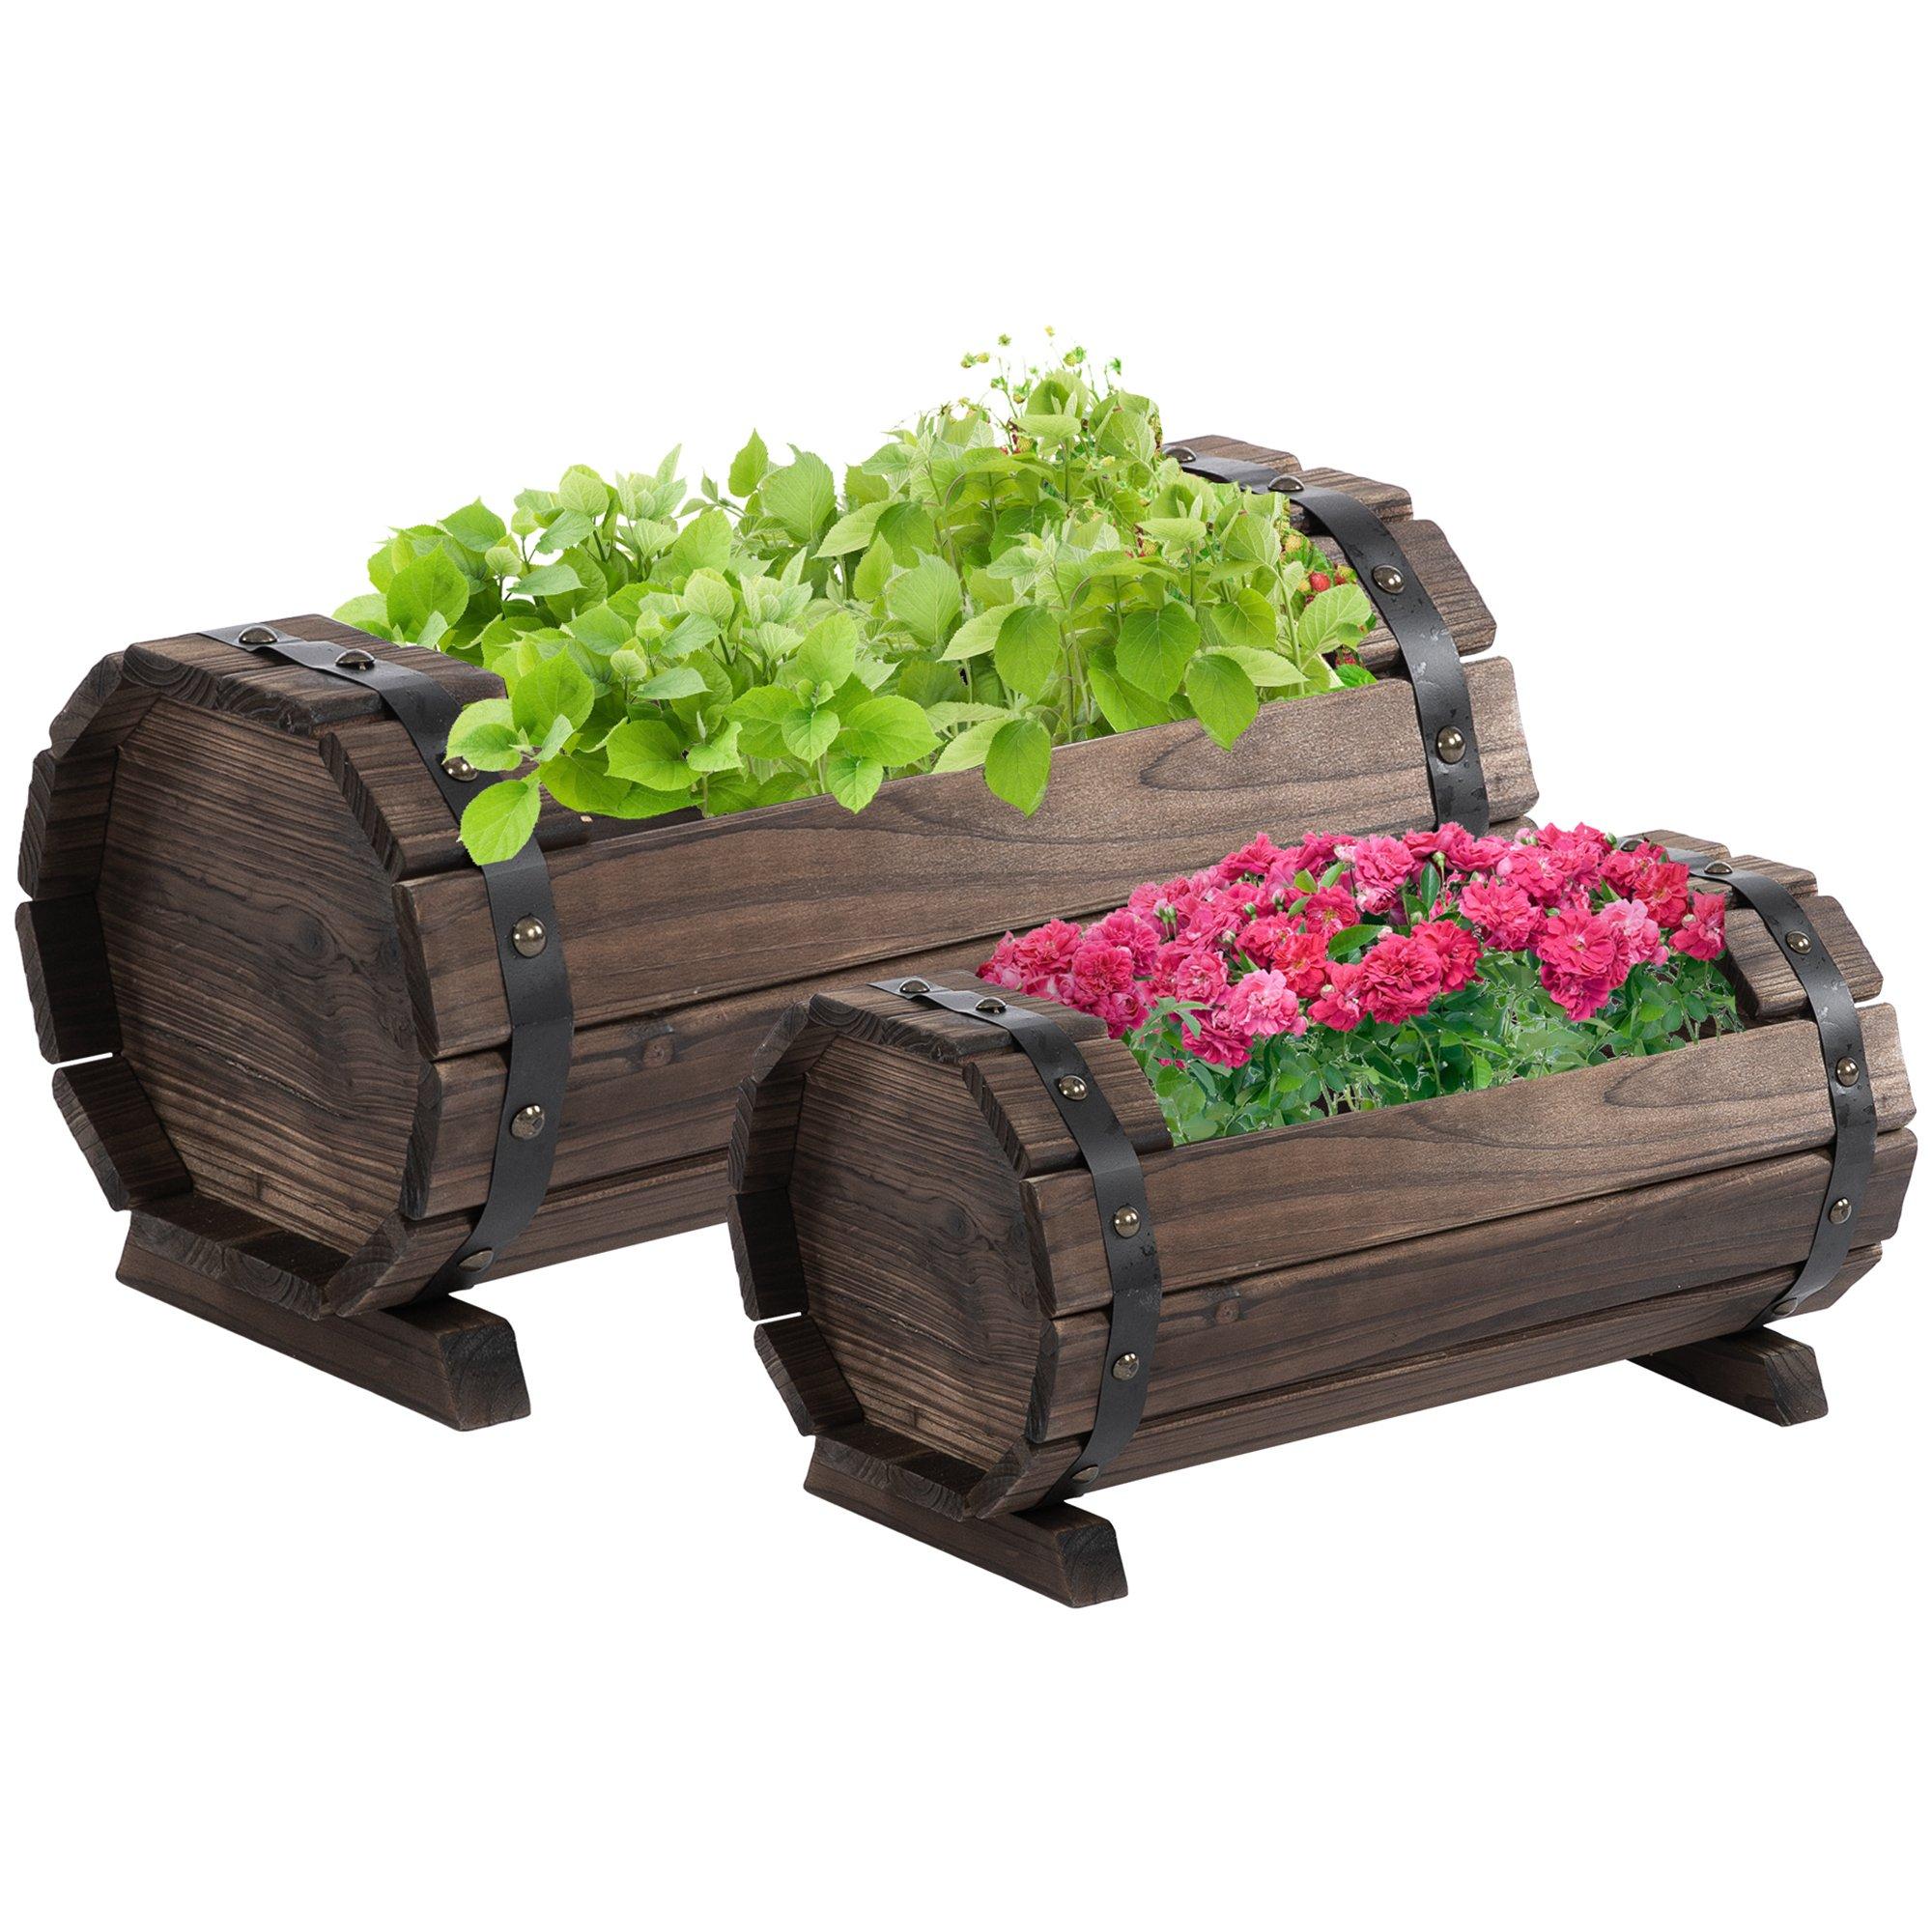 2PCs Wooden Flower Plant Pot Outdoor Plant Box with Solid Wood